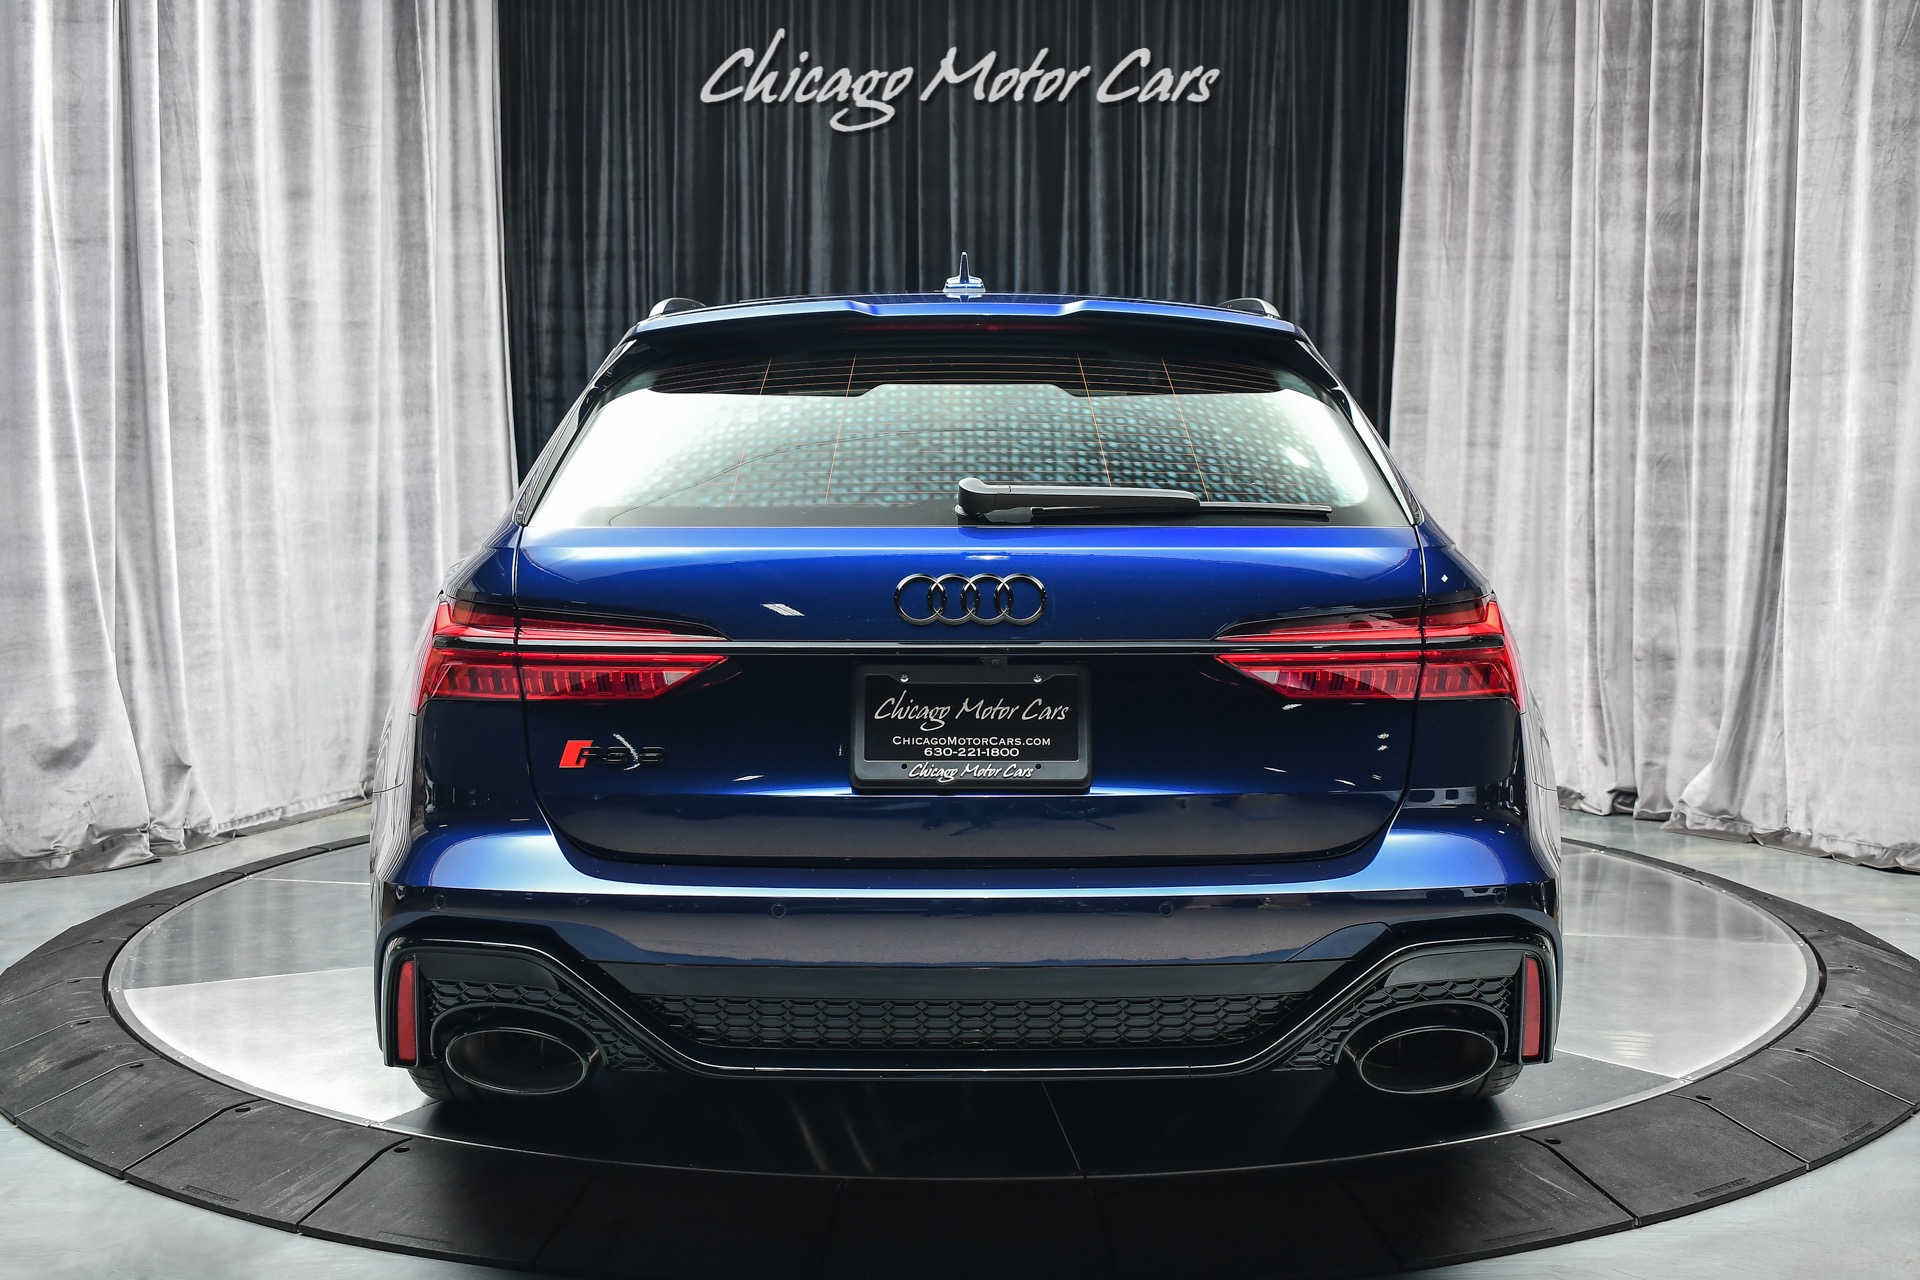 Used-2021-Audi-RS6-40T-quattro-Avant-SOLD-OUT-PRODUCTION-ONLY-229-MILES-LOADED